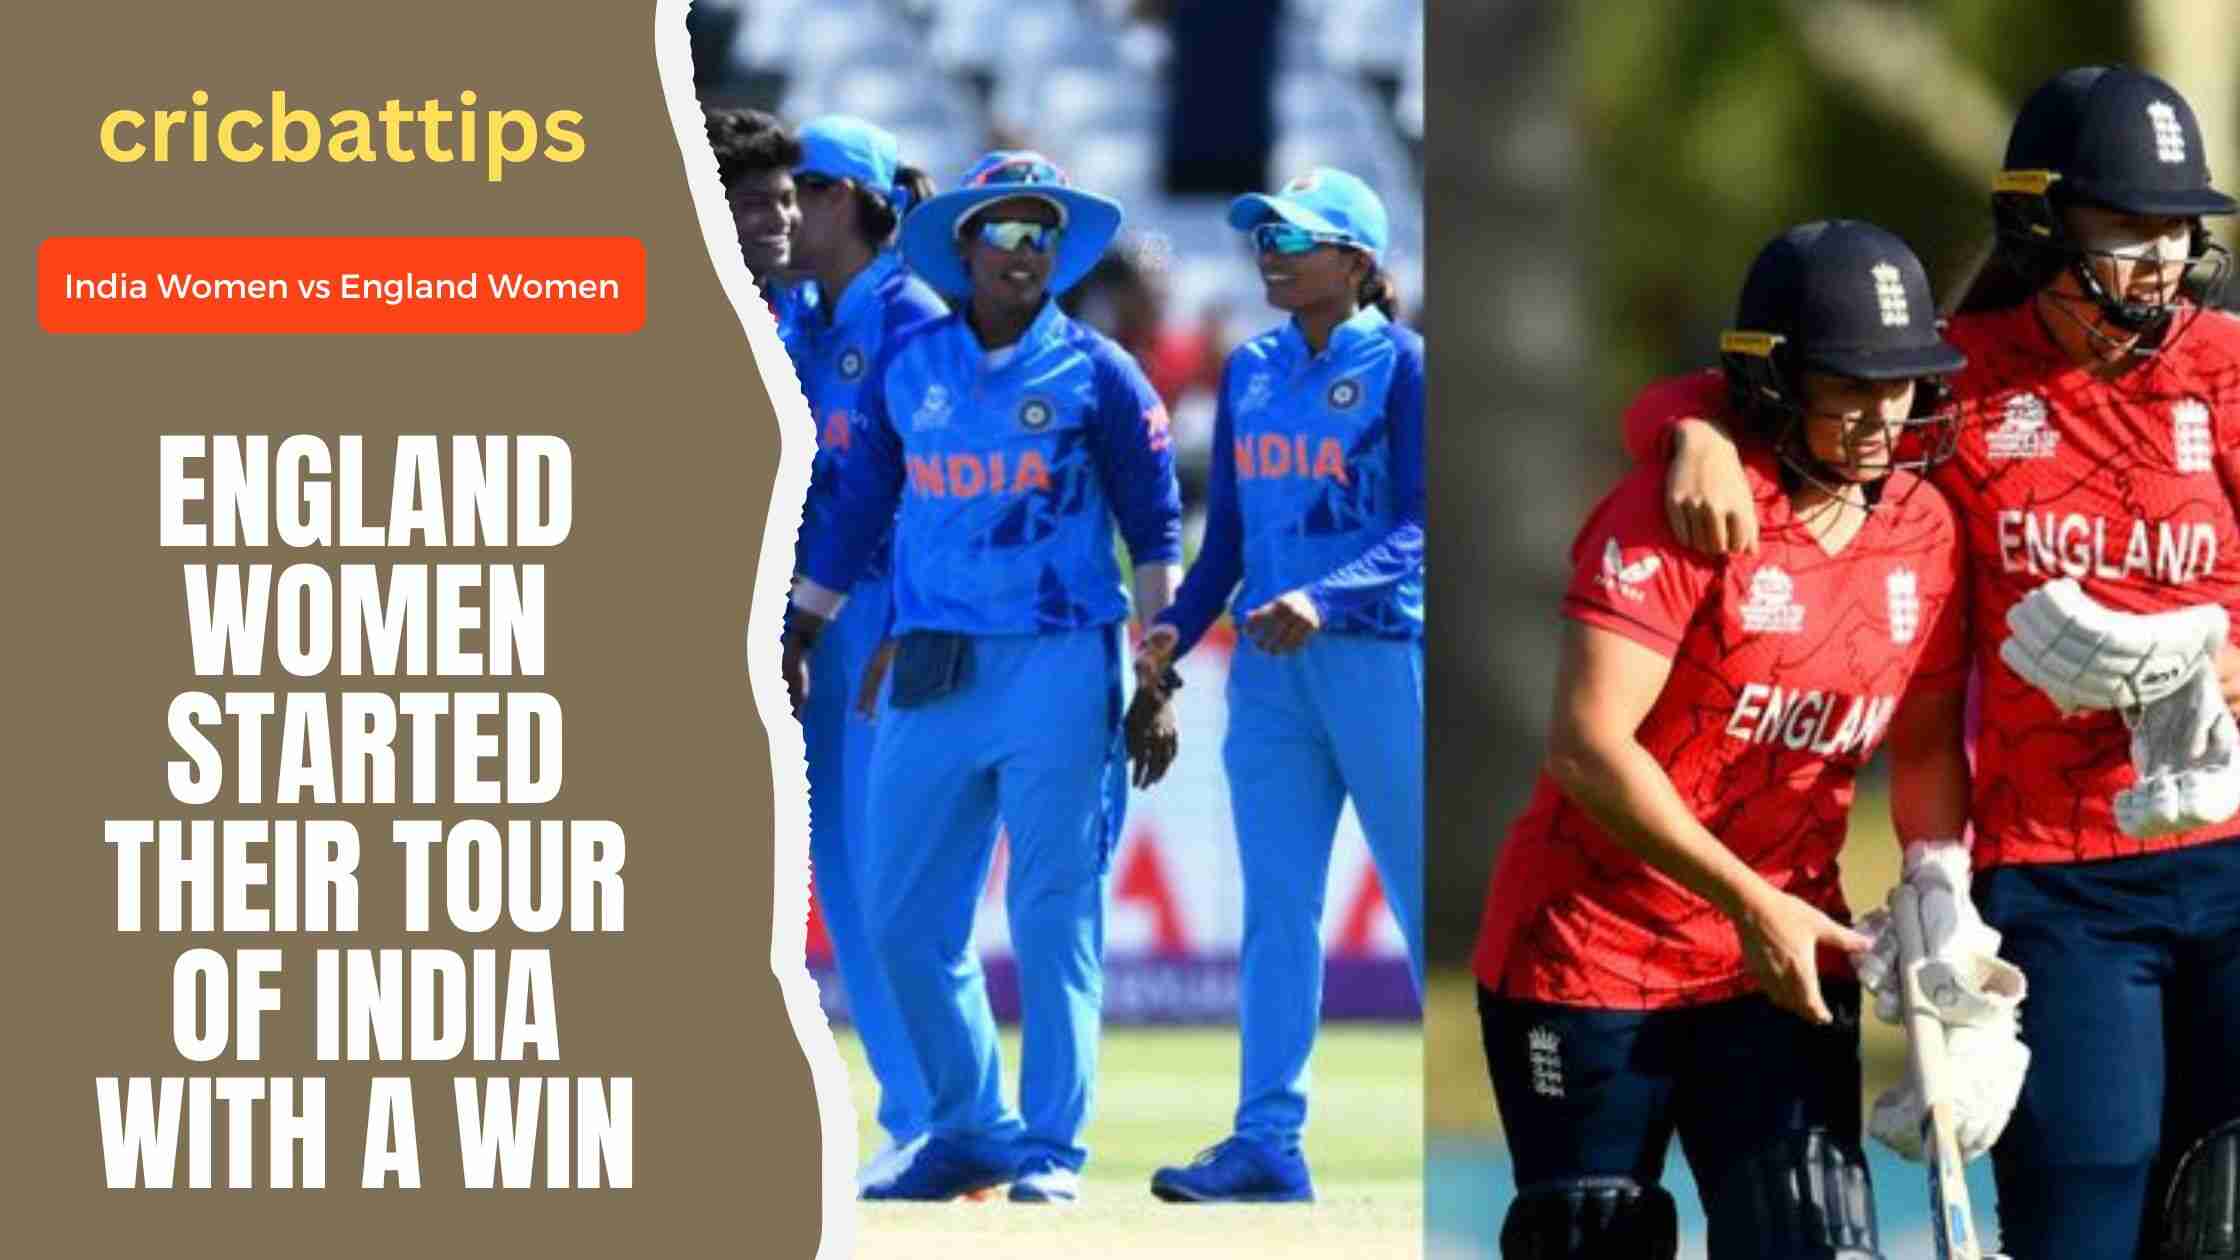 England Women started their tour of India with a convincing 38-run win over India